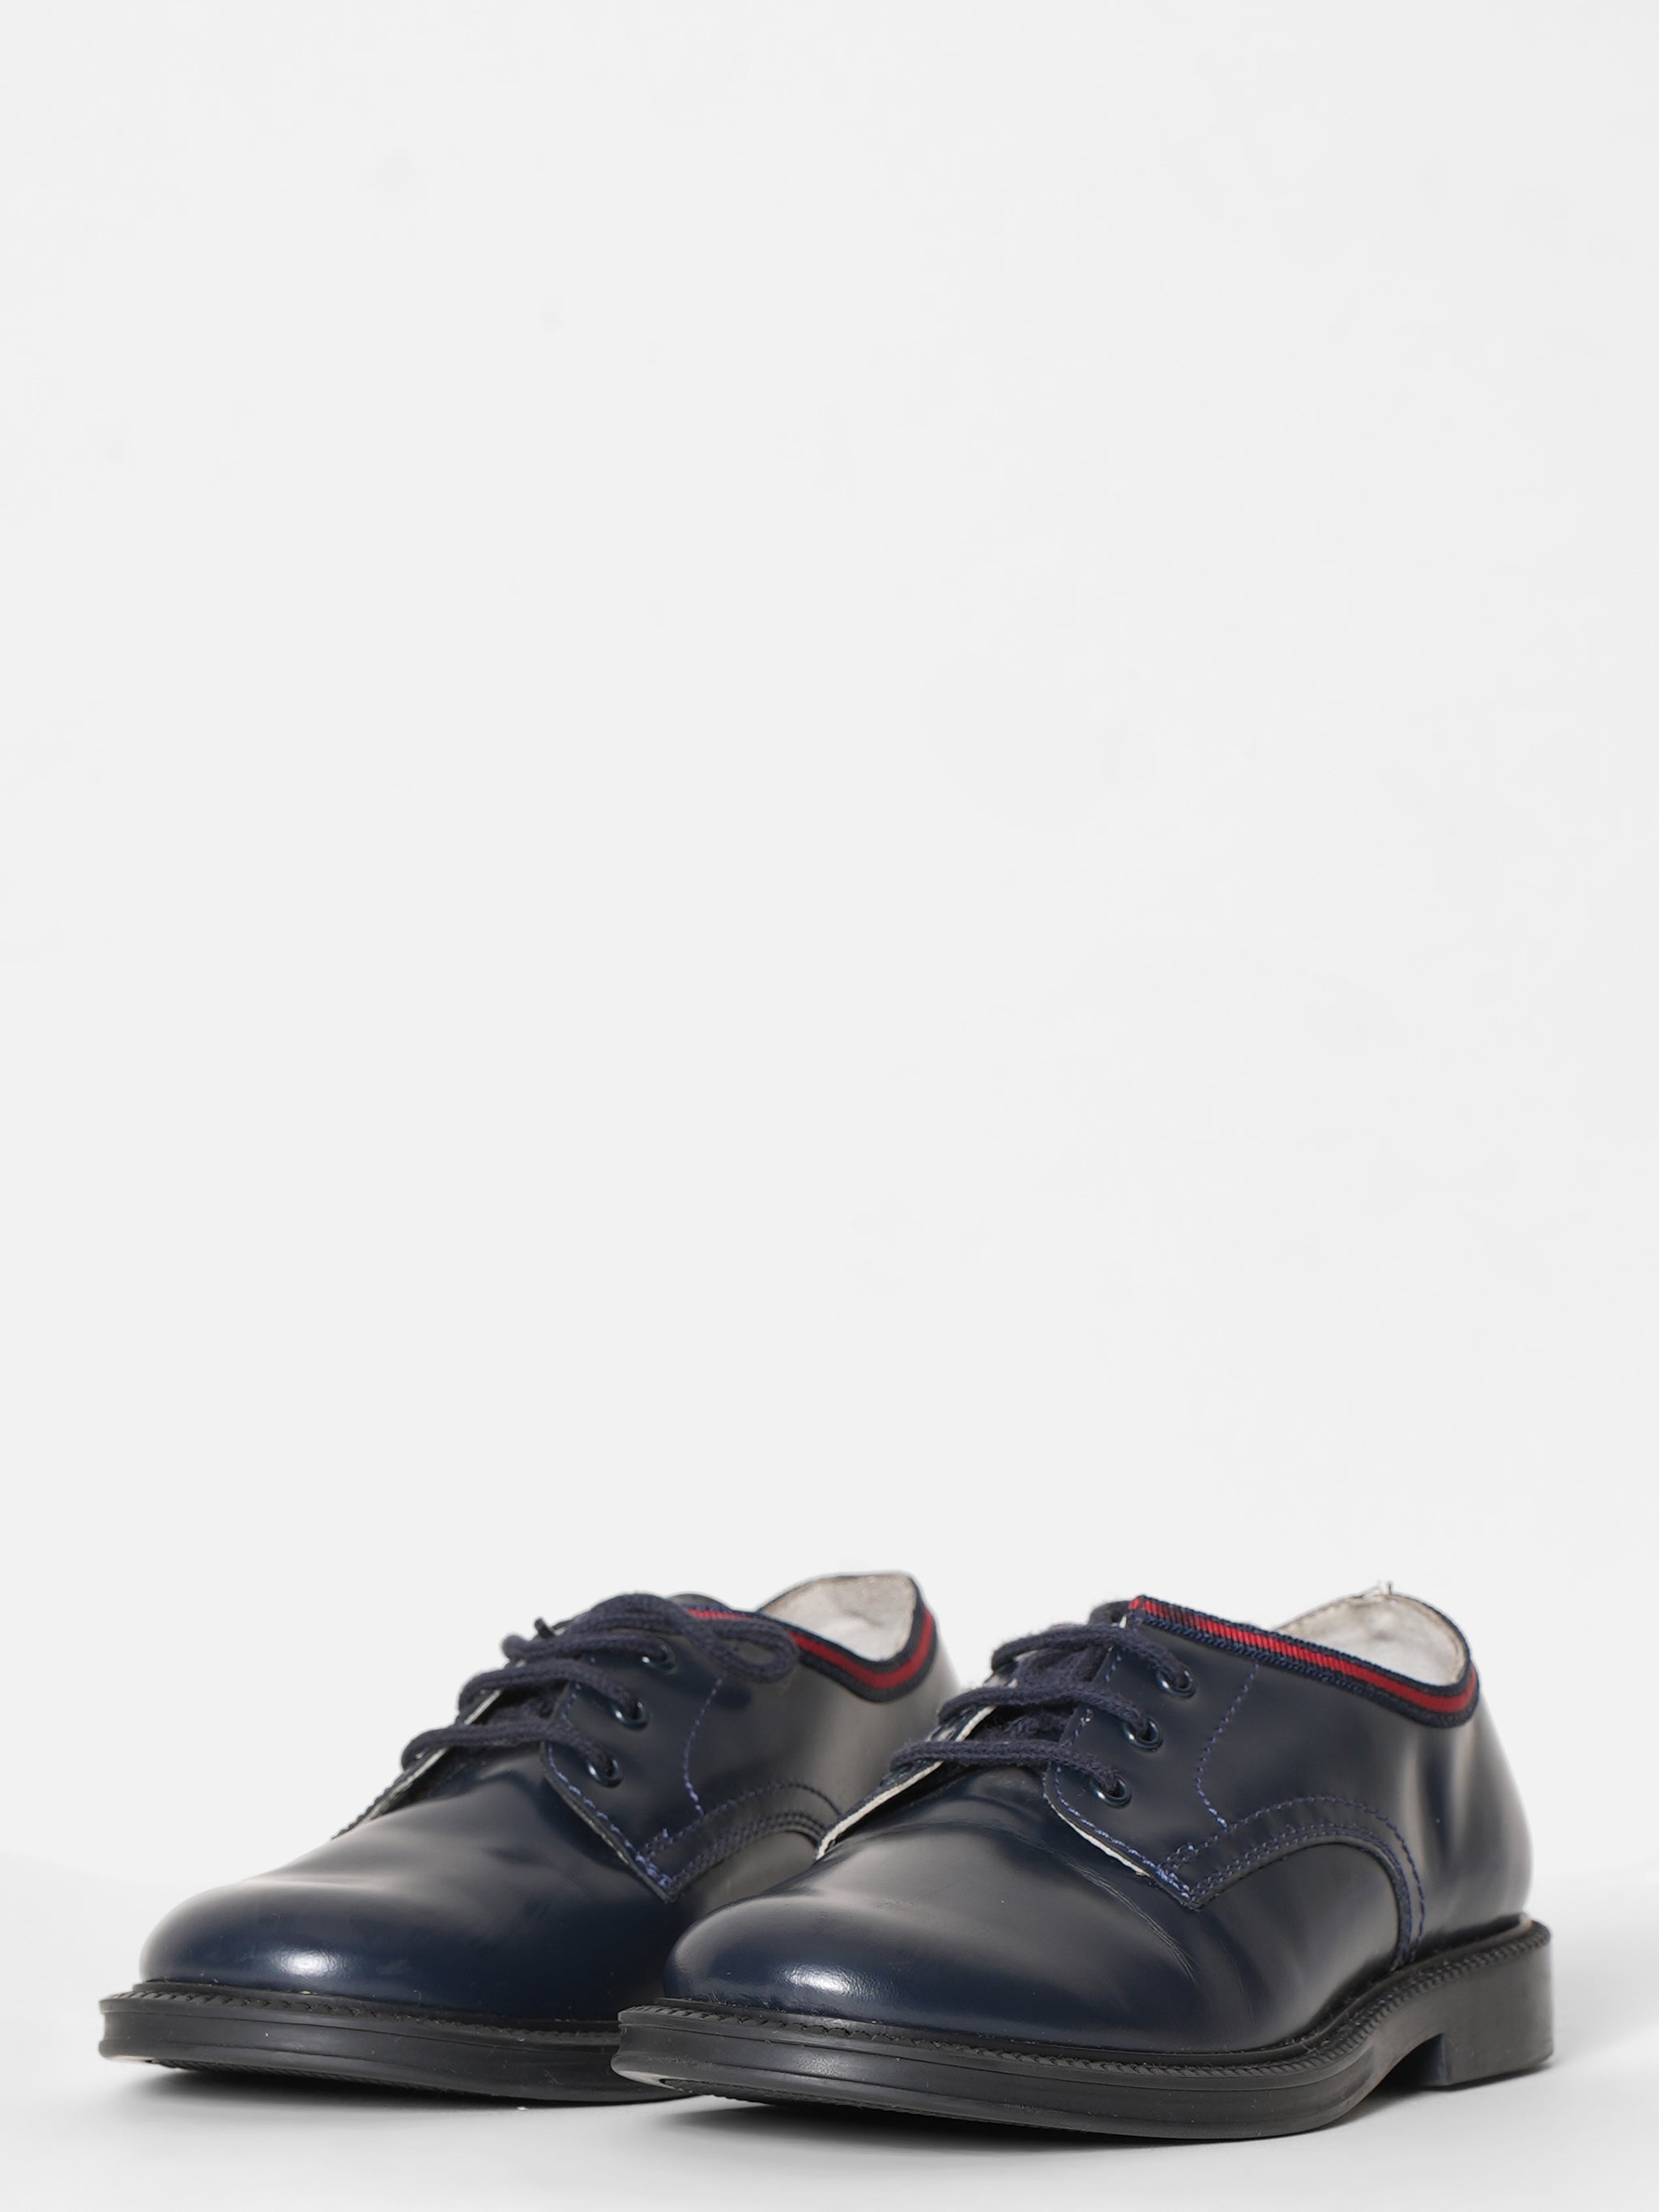 Gucci Lace Up Leather Shoes